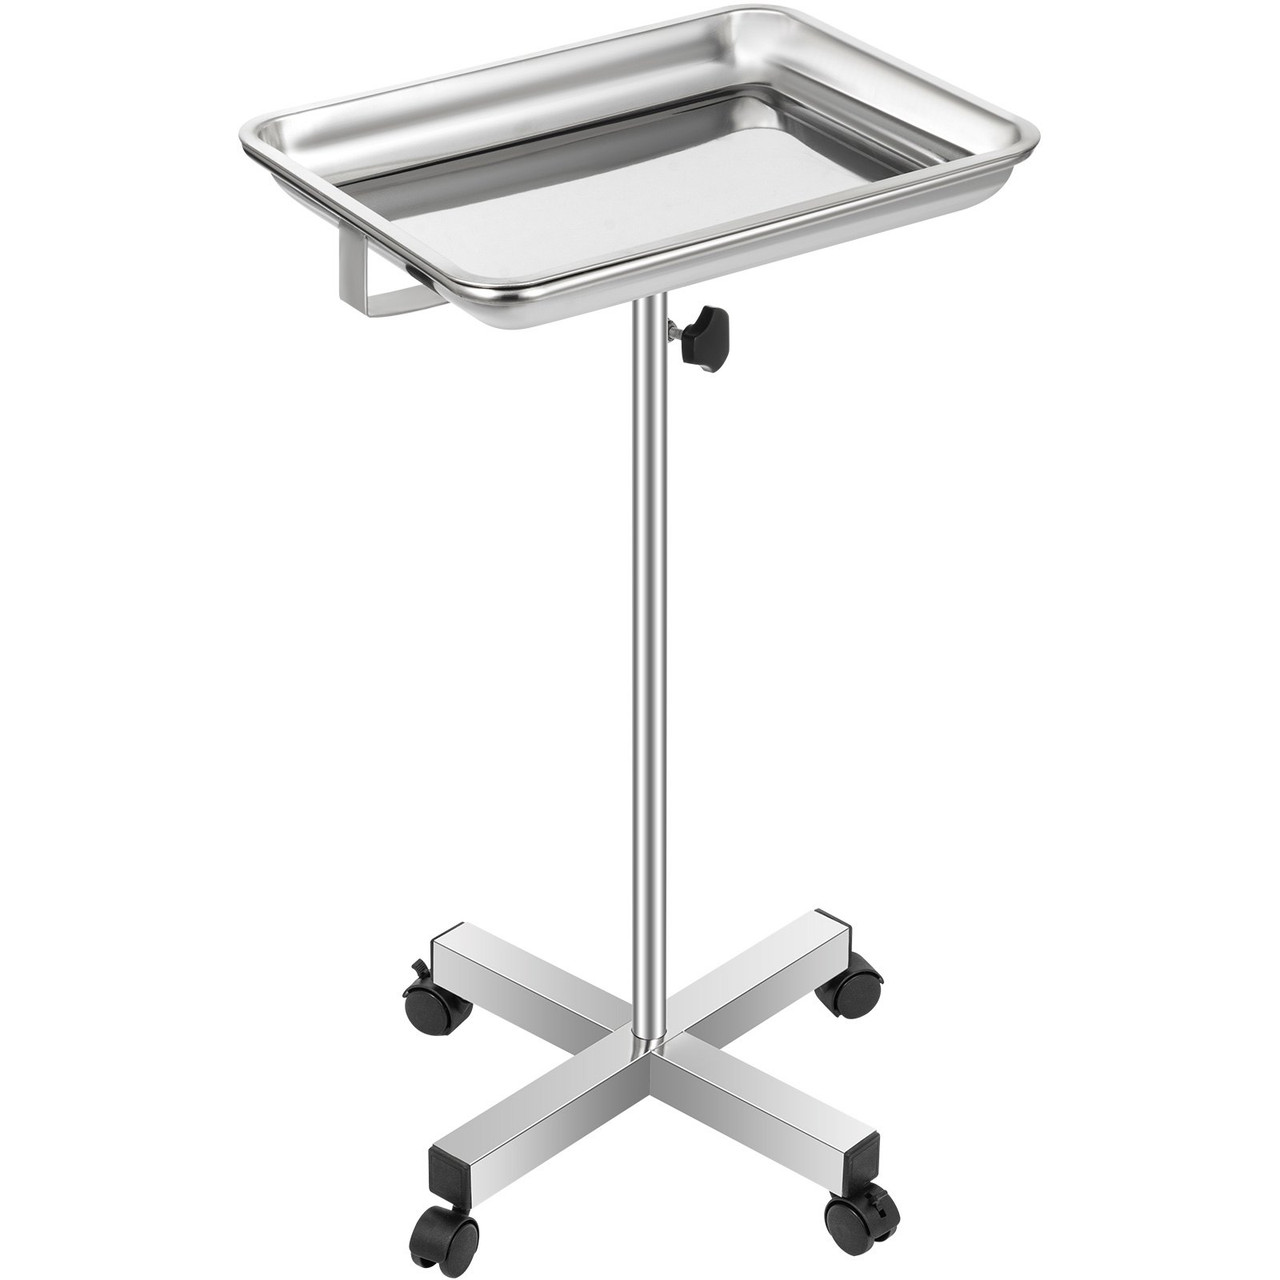 Mayo Tray Stainless Steel Mayo Stand 18x14 Inch Trolley Mayo Tray Stand Adjustable Height 32-51 Inch Instrument Tray w/ Removable Tray & 4 Omnidirectional Wheels for Home Equipment Personal Care